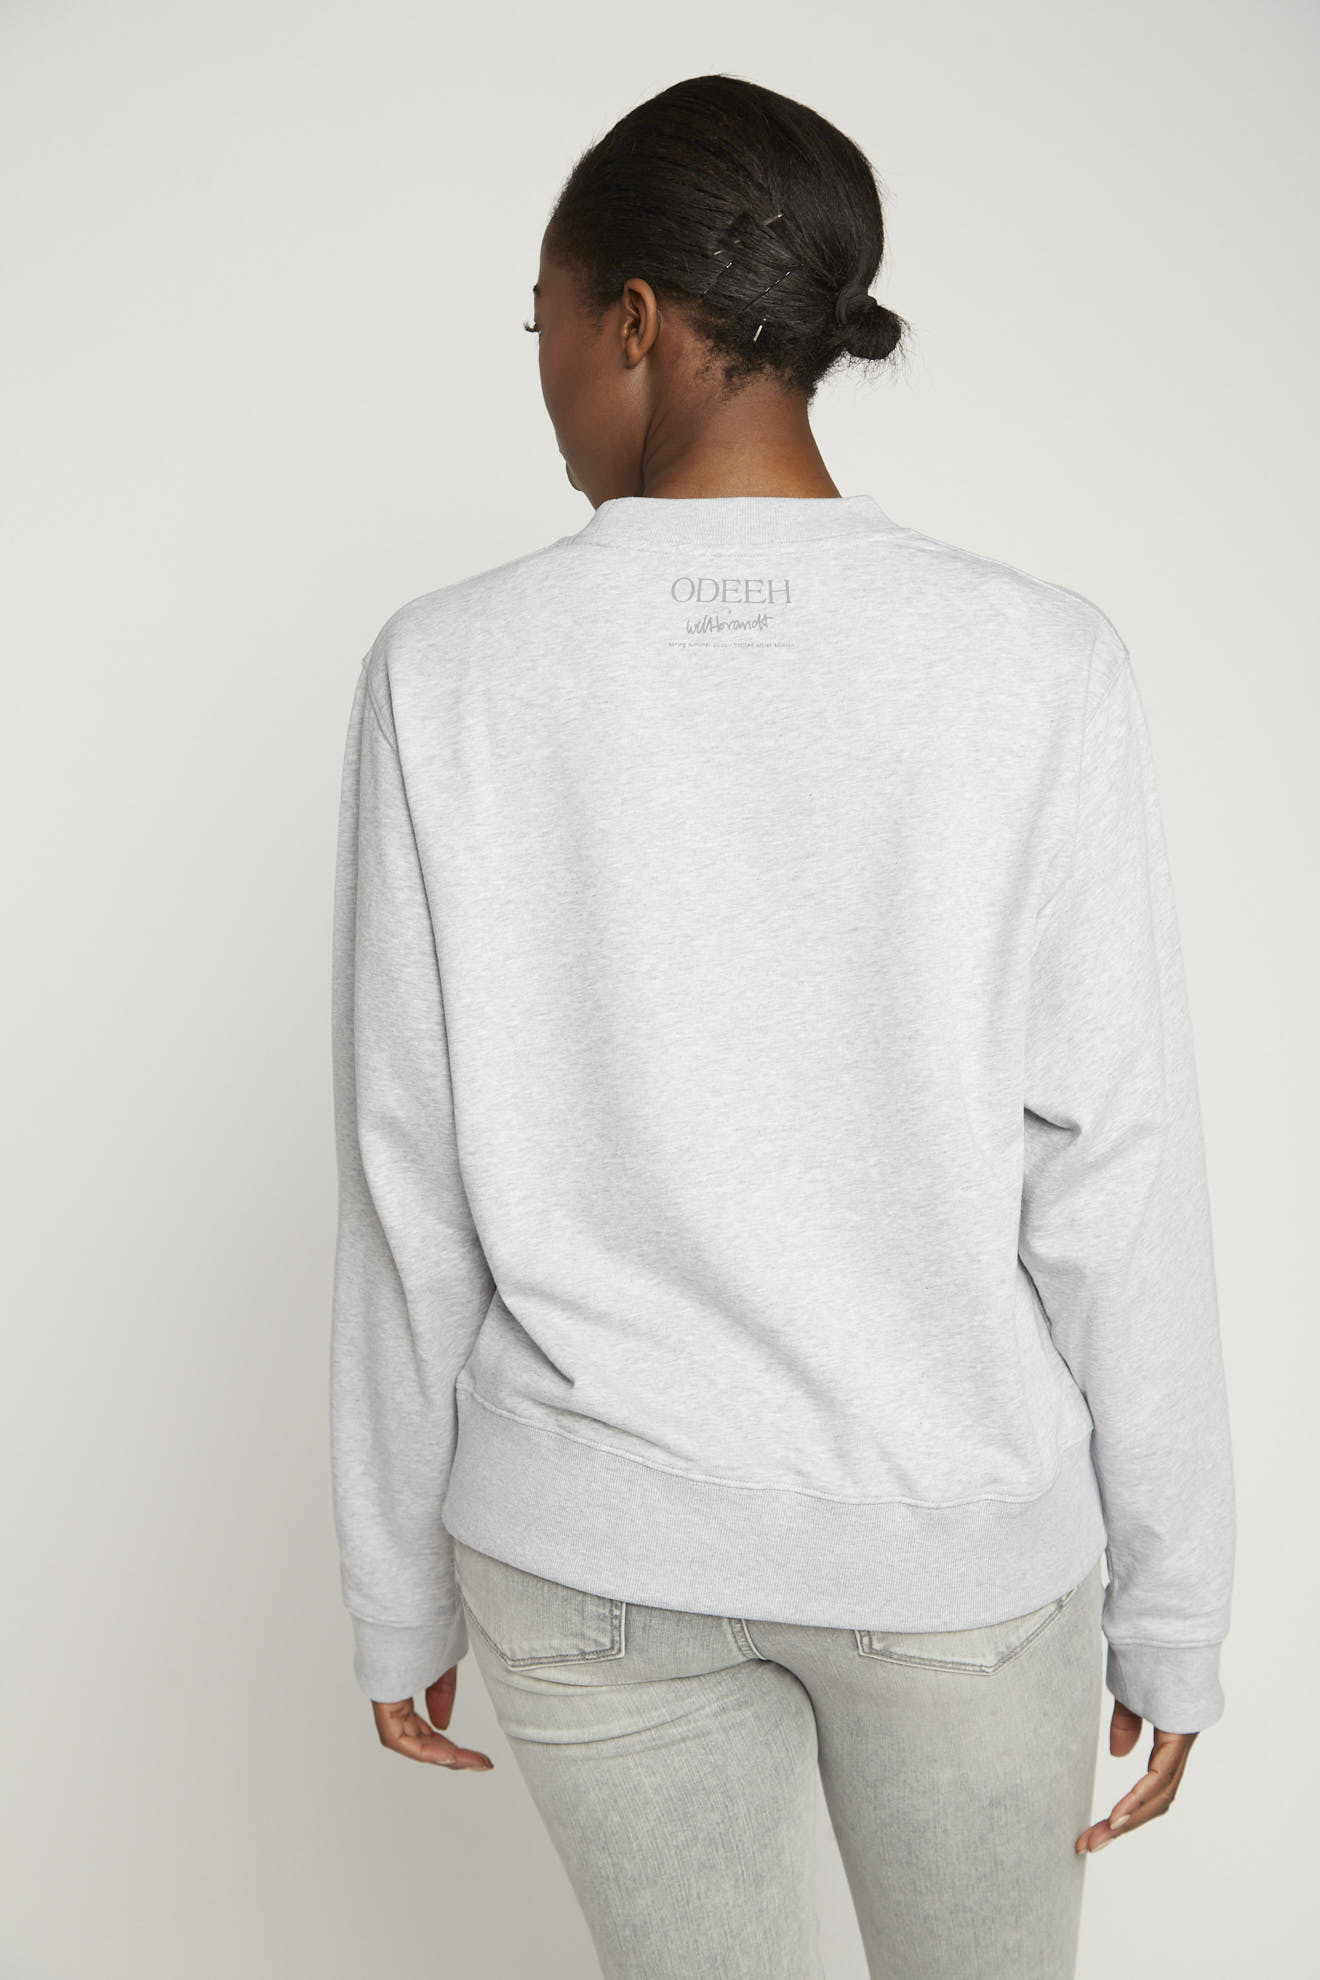 odeeh sweater grey centered palm print cotton model back